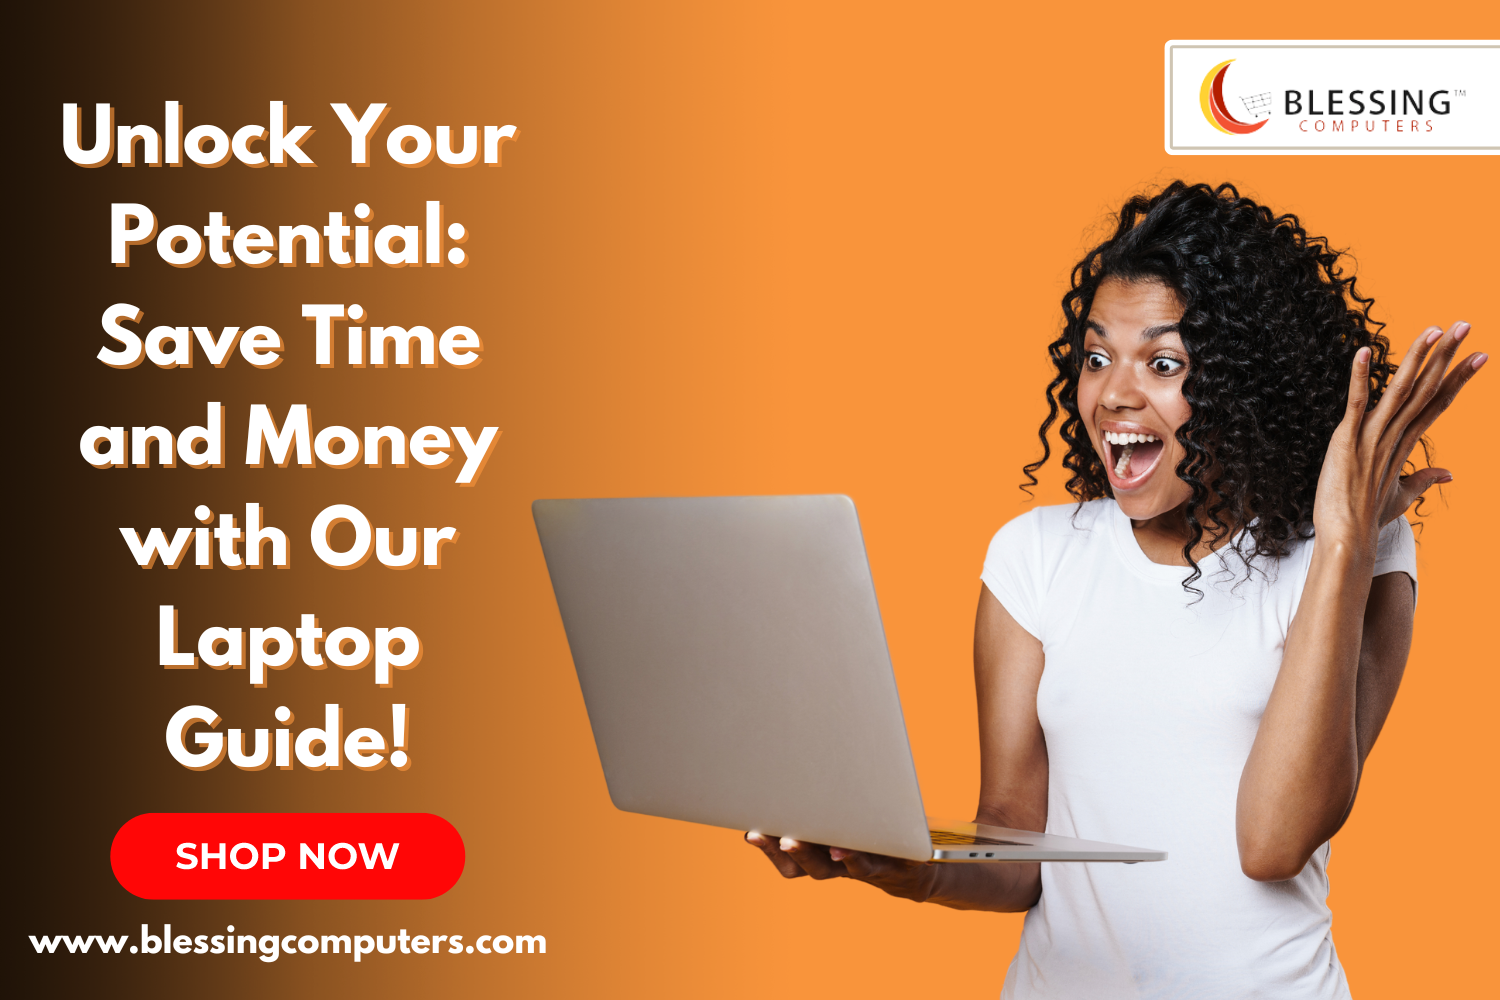 Unlock Your Potential Save Time and Money with Our Laptop Guide!